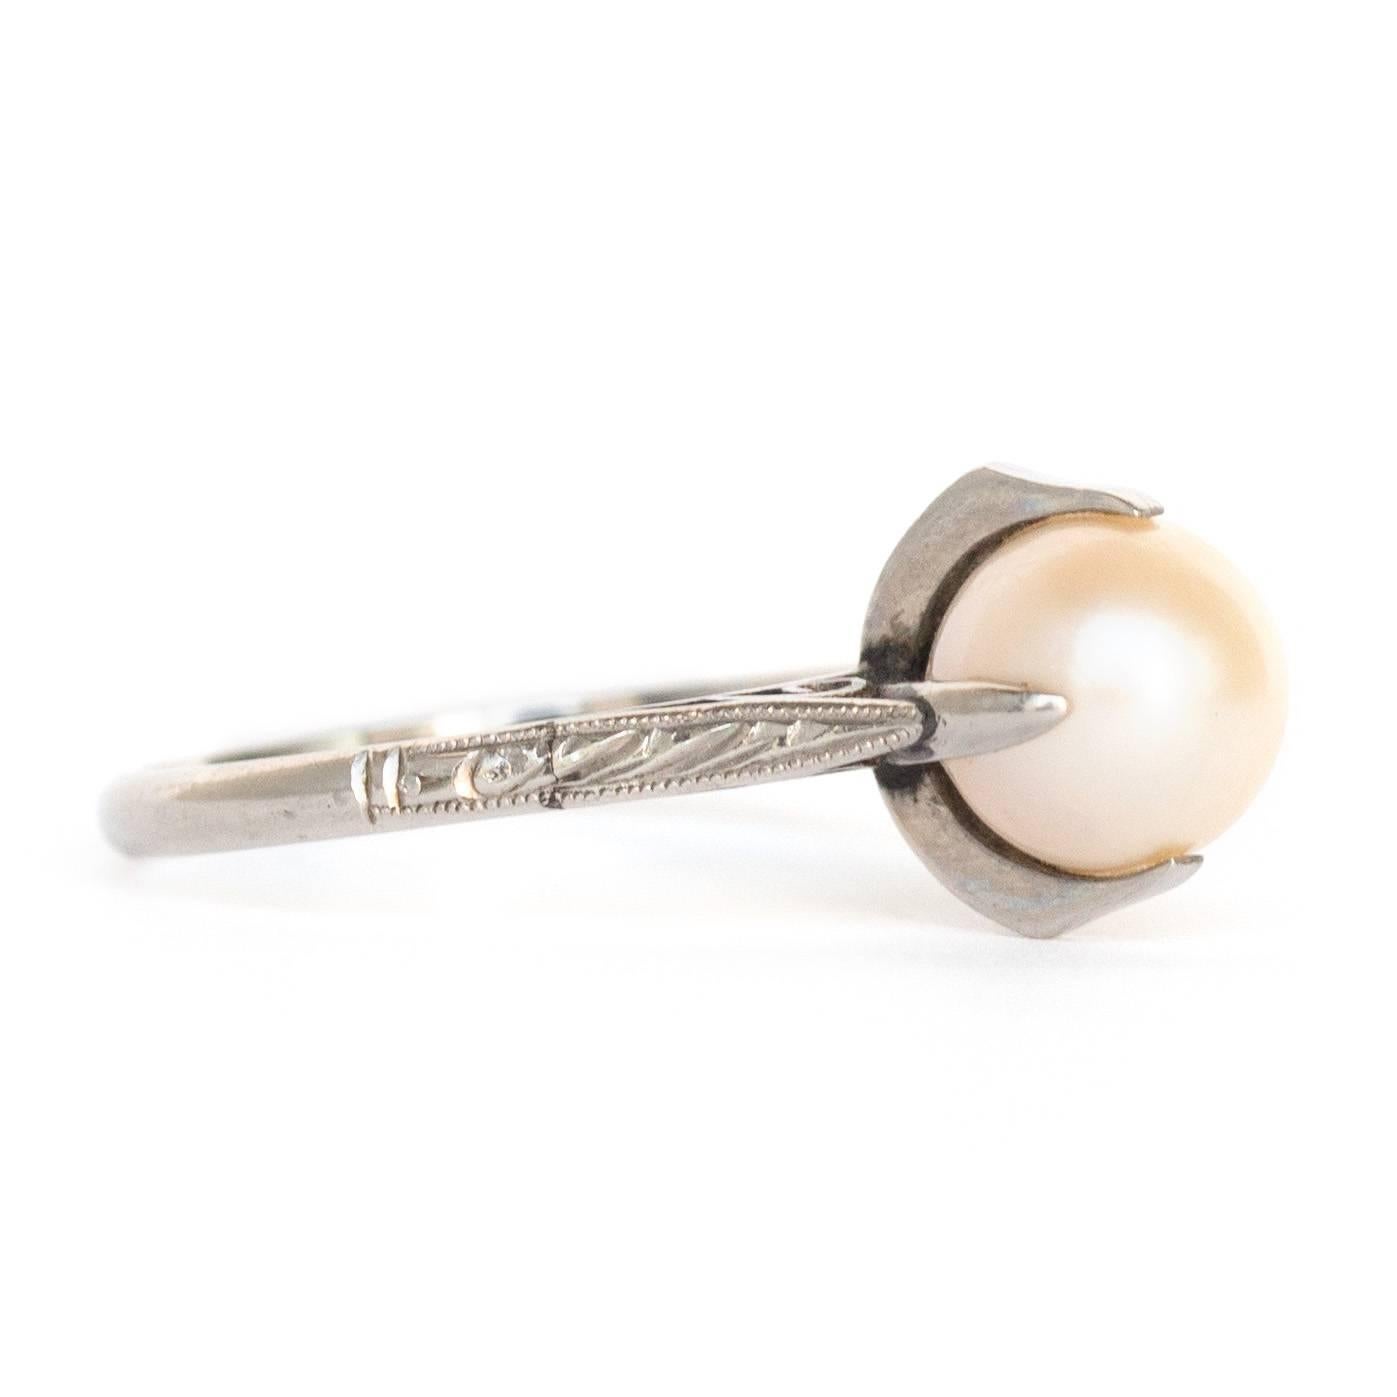 Item Details: 
Ring Size: 7.5
Metal Type: Platinum
Weight: 2 grams

Pearl Details: 
Type: Pearl
Shape: Natural
Carat Weight: 2 Carat, total weight.
Quality: AAA+ Luster

Finger to Top of Stone Measurement: 10mm